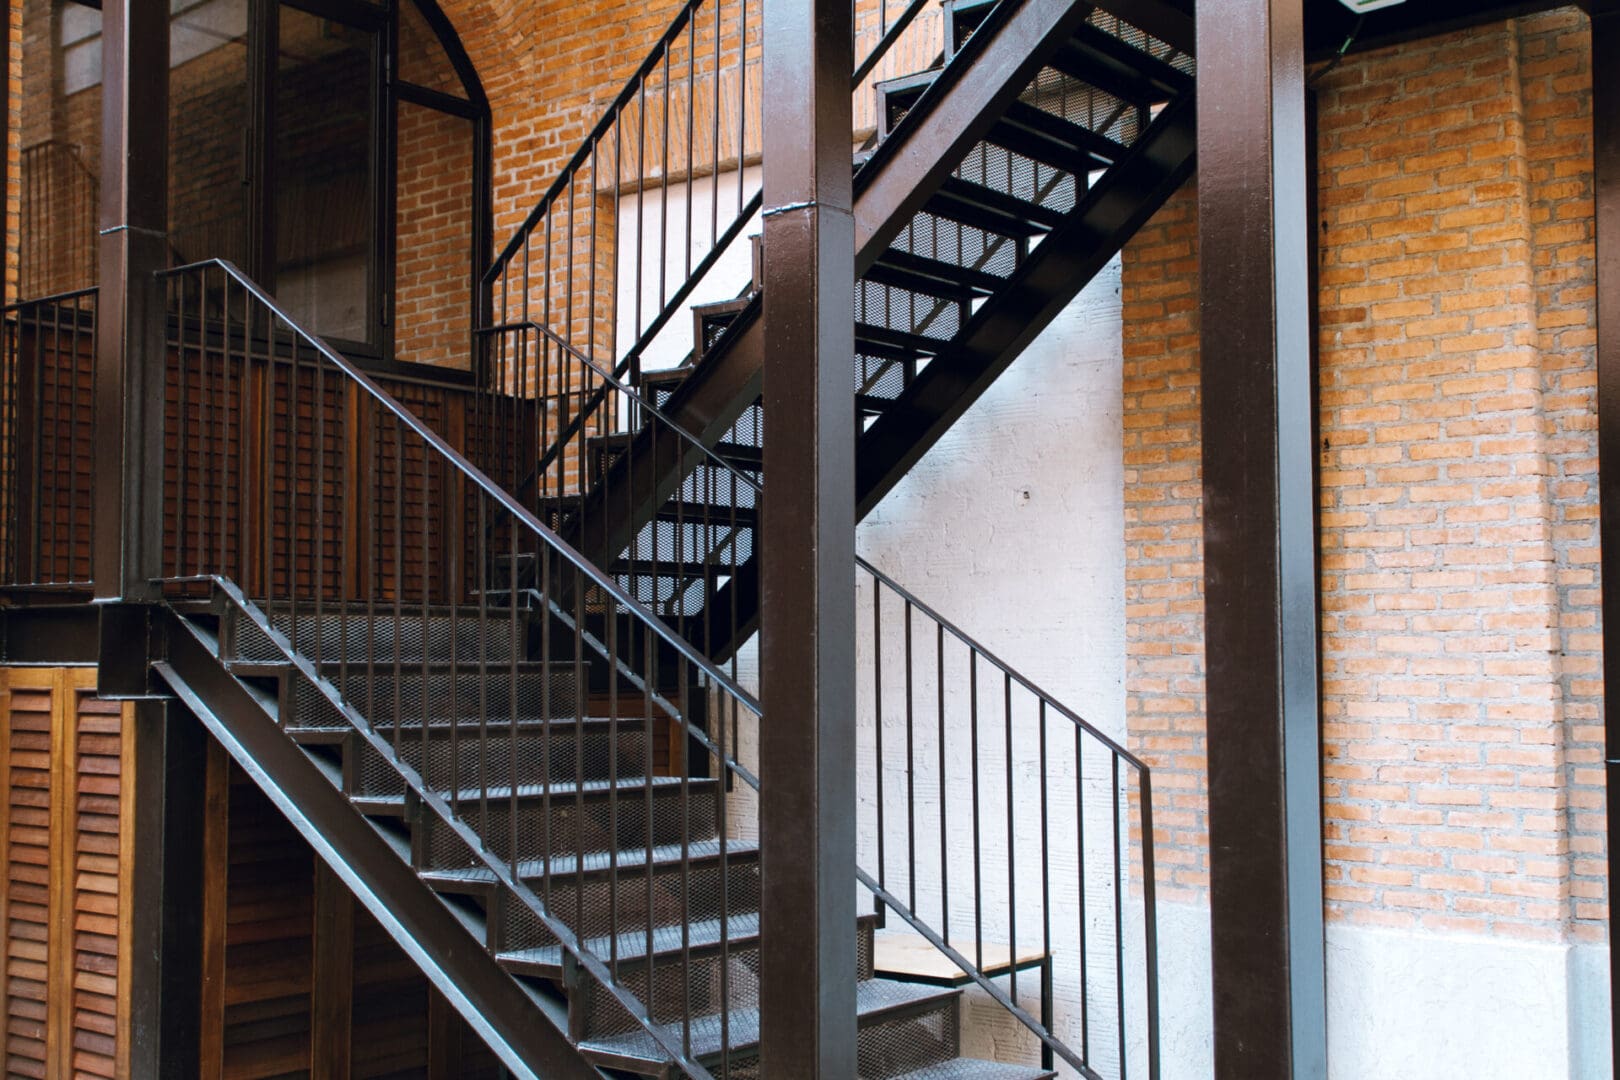 A staircase with metal railing and steps.